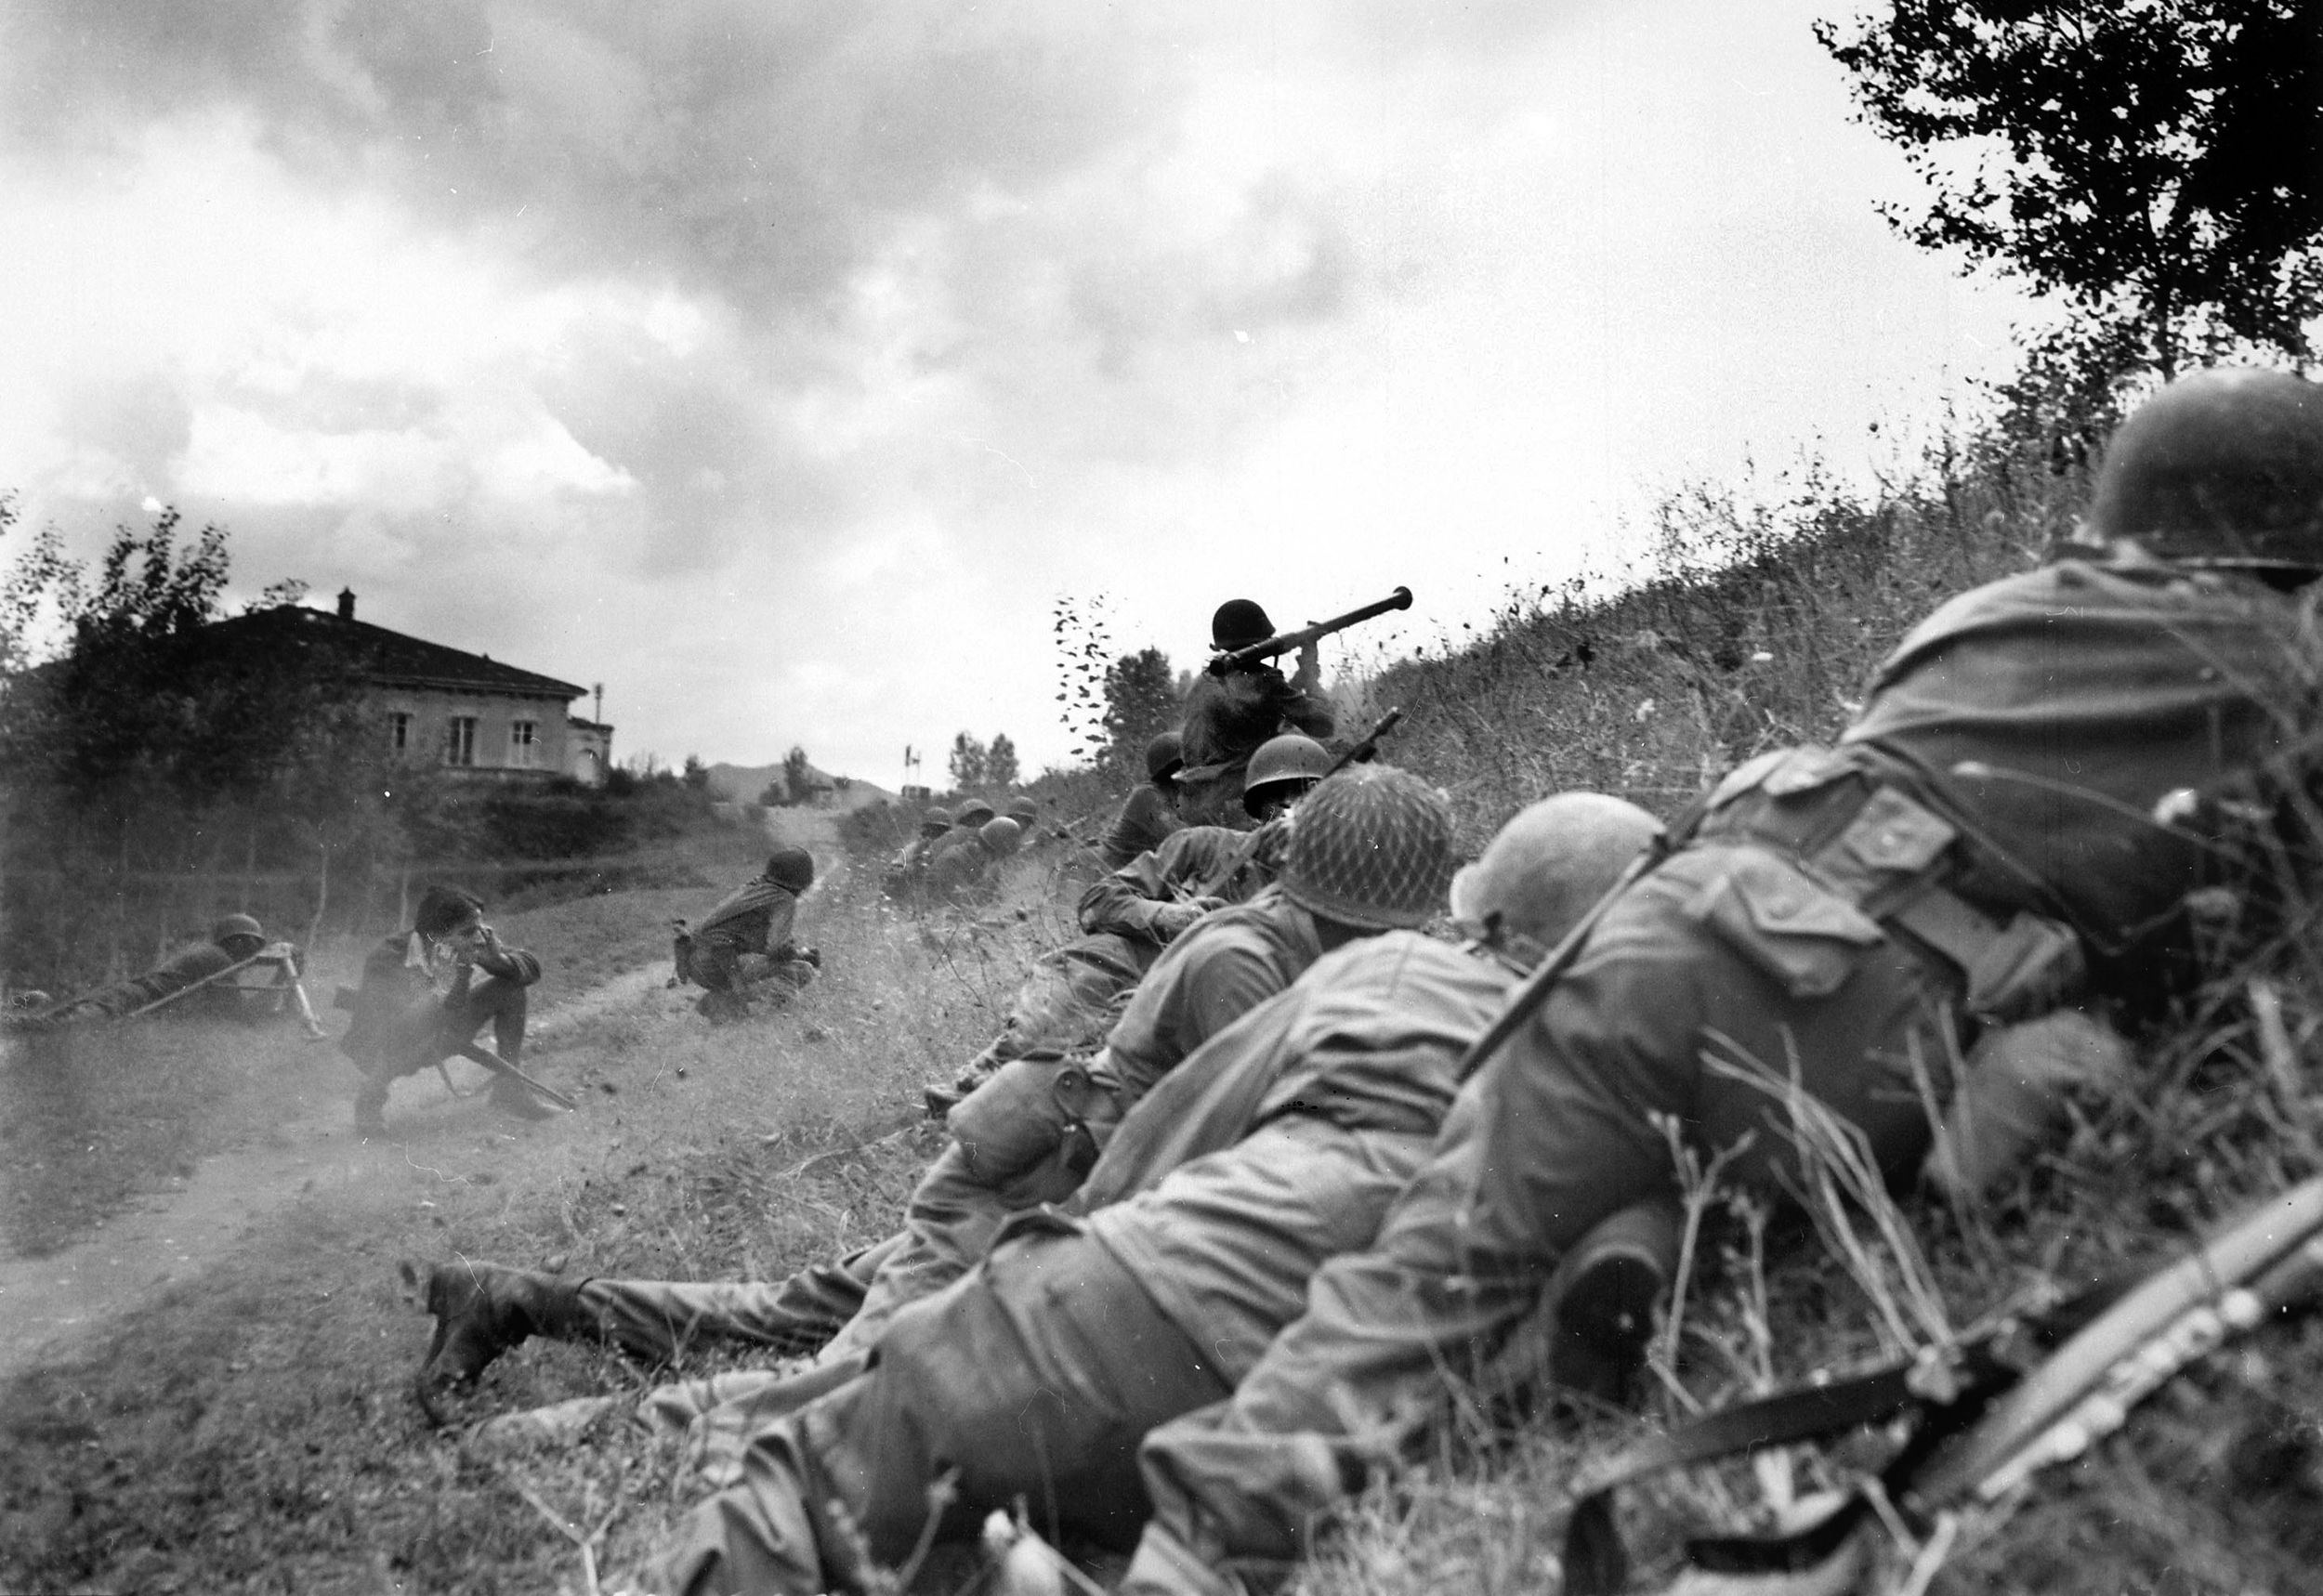 92nd Division troops fire a bazooka at a German machine-gun nest prior to attacking near Altopascio, Tuscany, September 1944. 